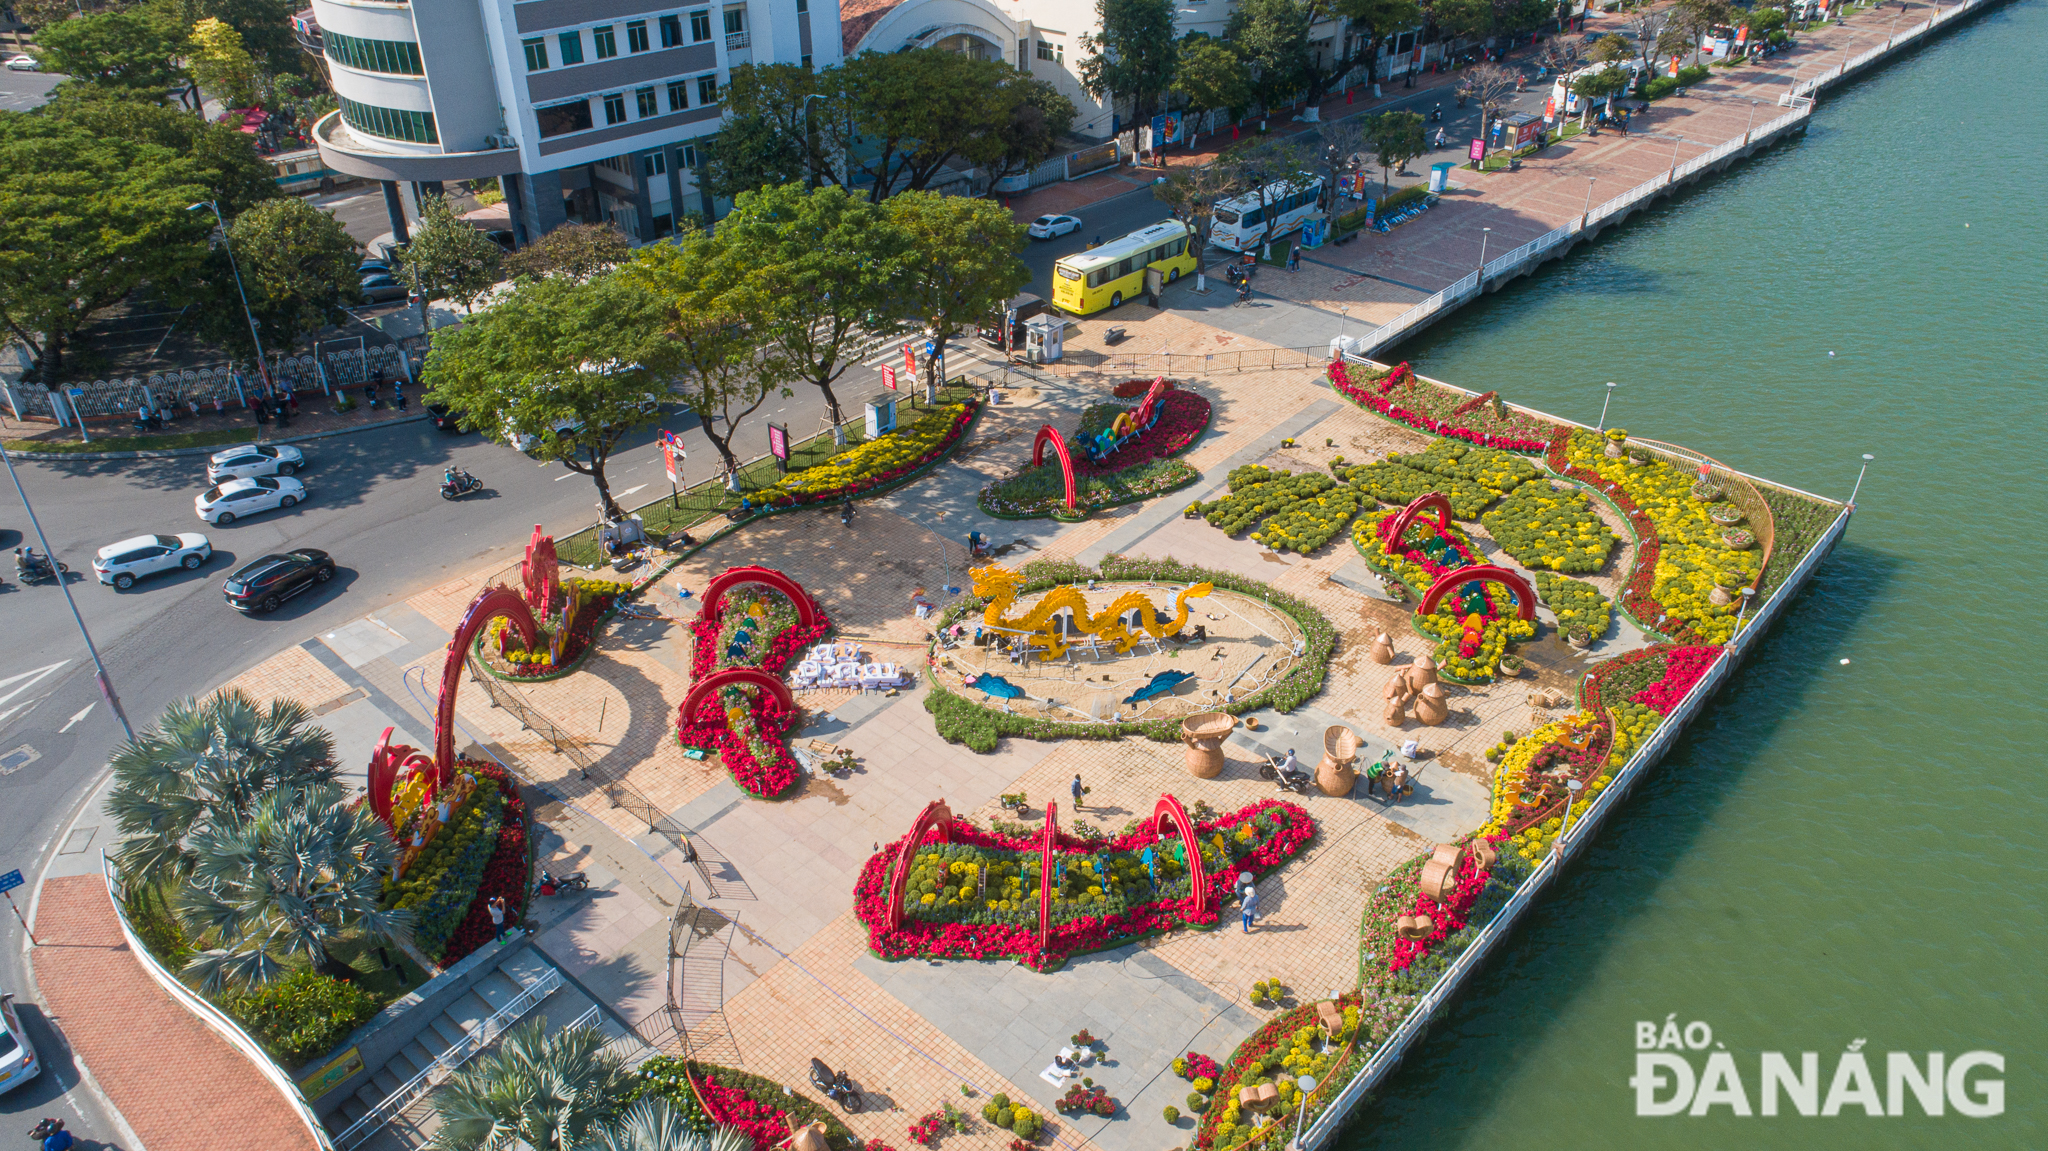 The colourful space of Tet flower streets features miniature scenes of the Dragon mascot and colourful flowers along both banks of the Han River.